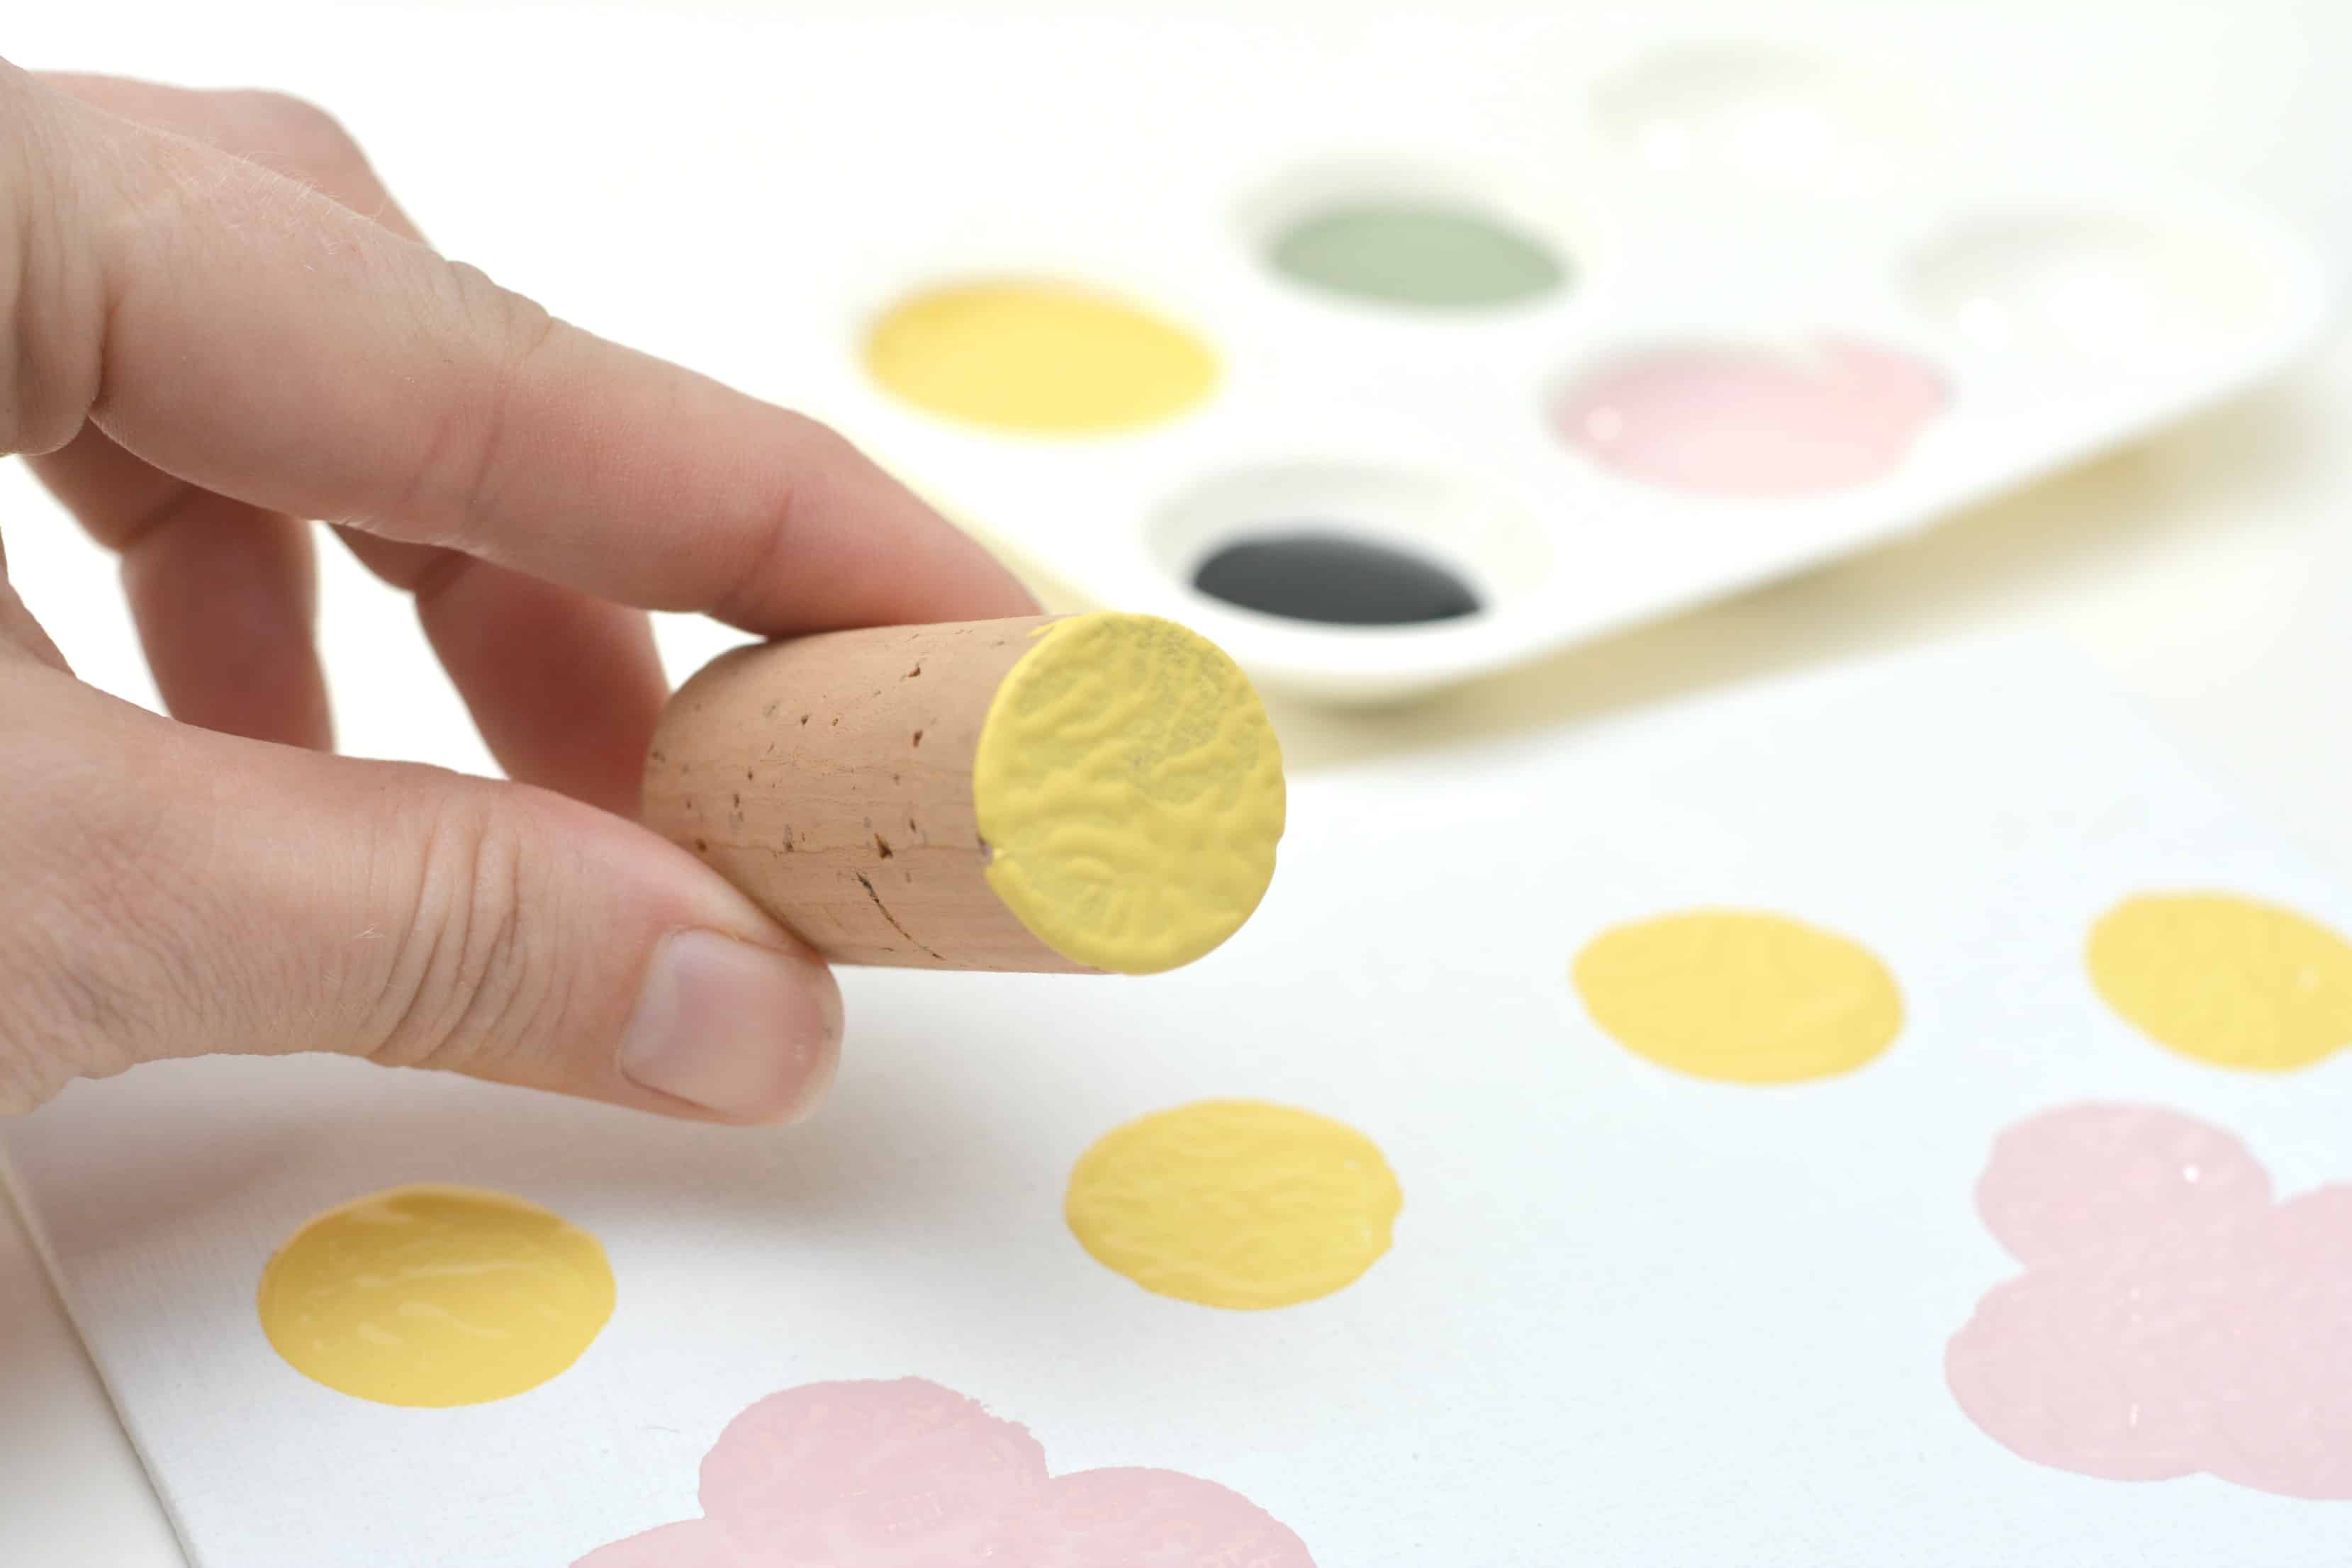 Today I would like to share the Bumble Bee and Spring Flower Wine cork Painting with you and your little ones. I found this craft is so adorable that will improve the mood and atmosphere.